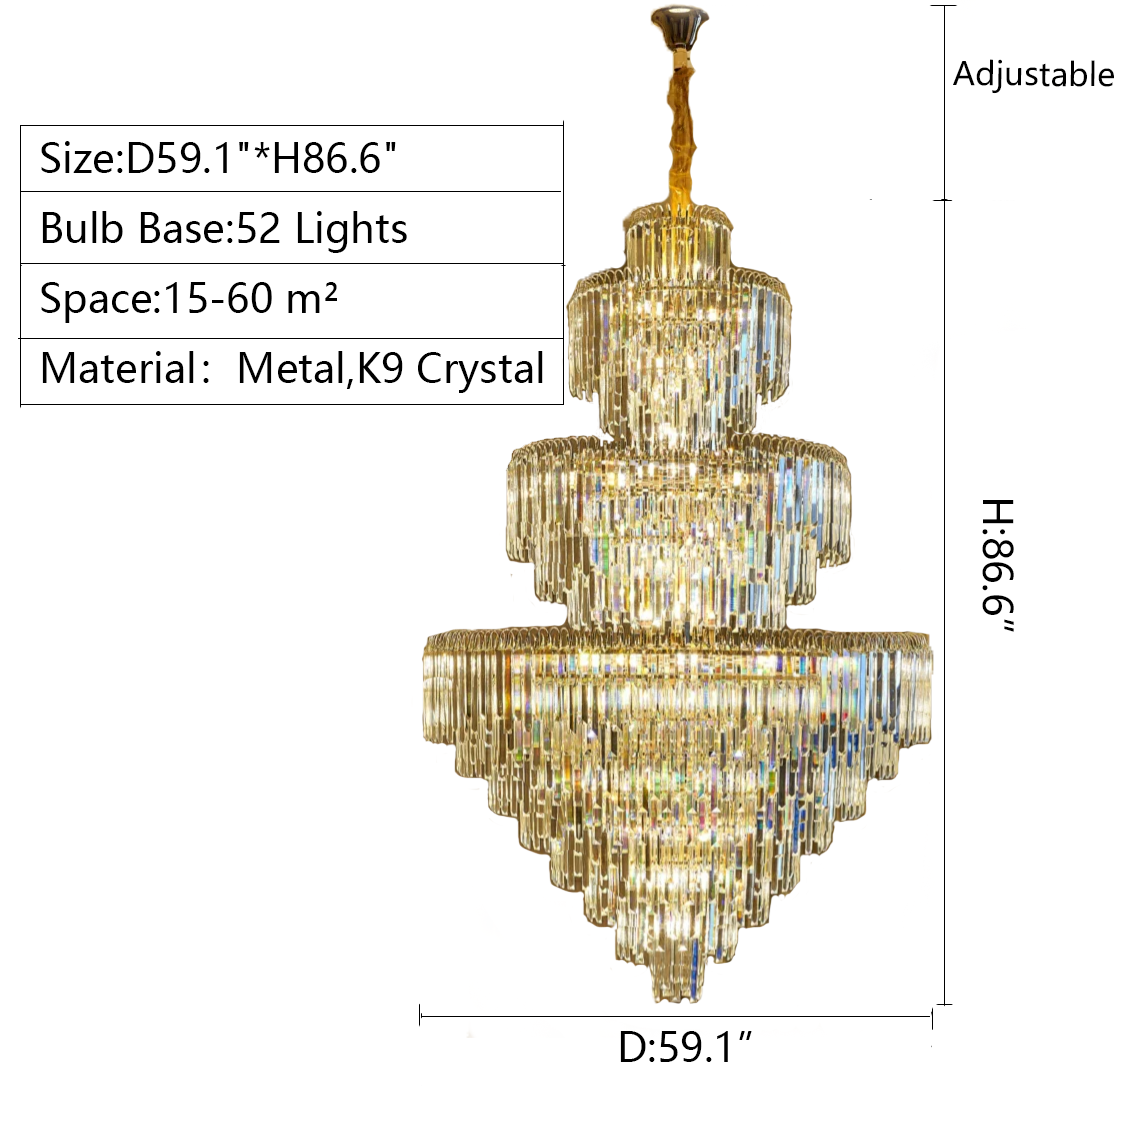 3 Layers Extra Large Living Room Chandelier Luxury Foyer Entryway Crystal Light Fixture Chandeliers Kevinstudiolives D59.1"*H86.6"/ 52 Lights Warm Light 